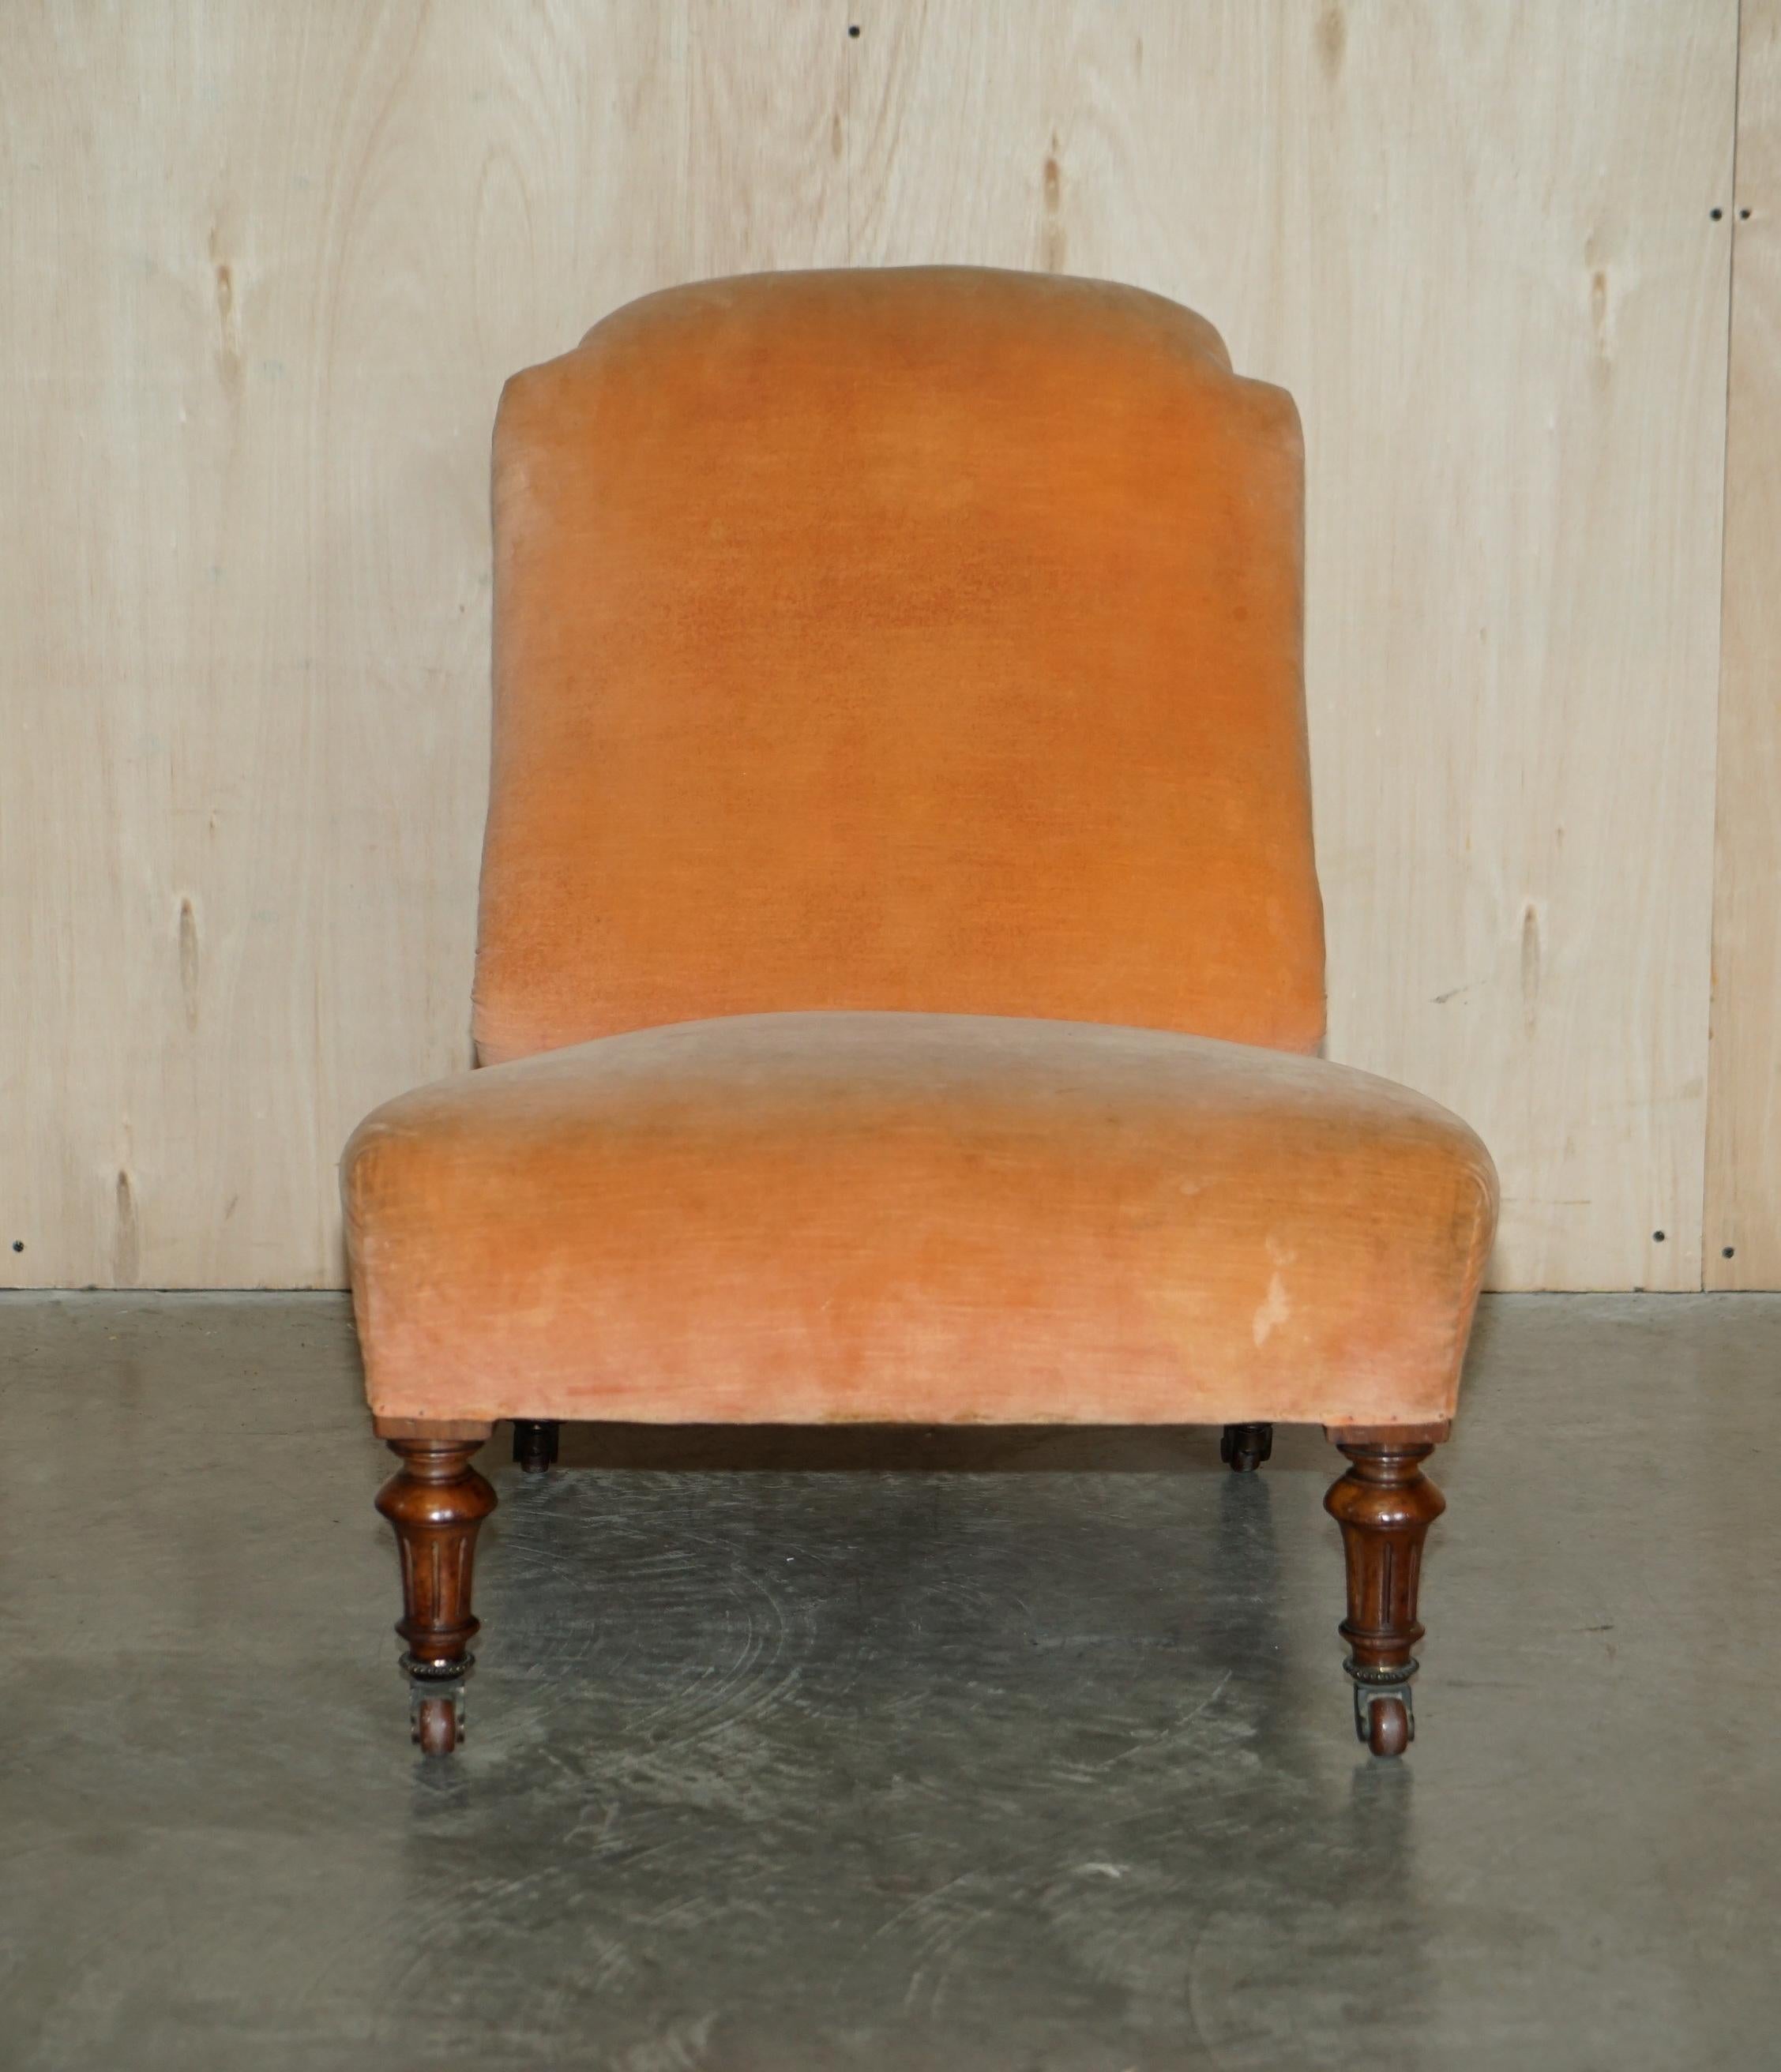 We are delighted to offer for sale this very nice Victorian circa 1860 Howard & Son's attributed, walnut framed nursing chair with peach velour upholstery and period porcelain castors 

A nicely made genuine Victorian antique, it is as mentioned a